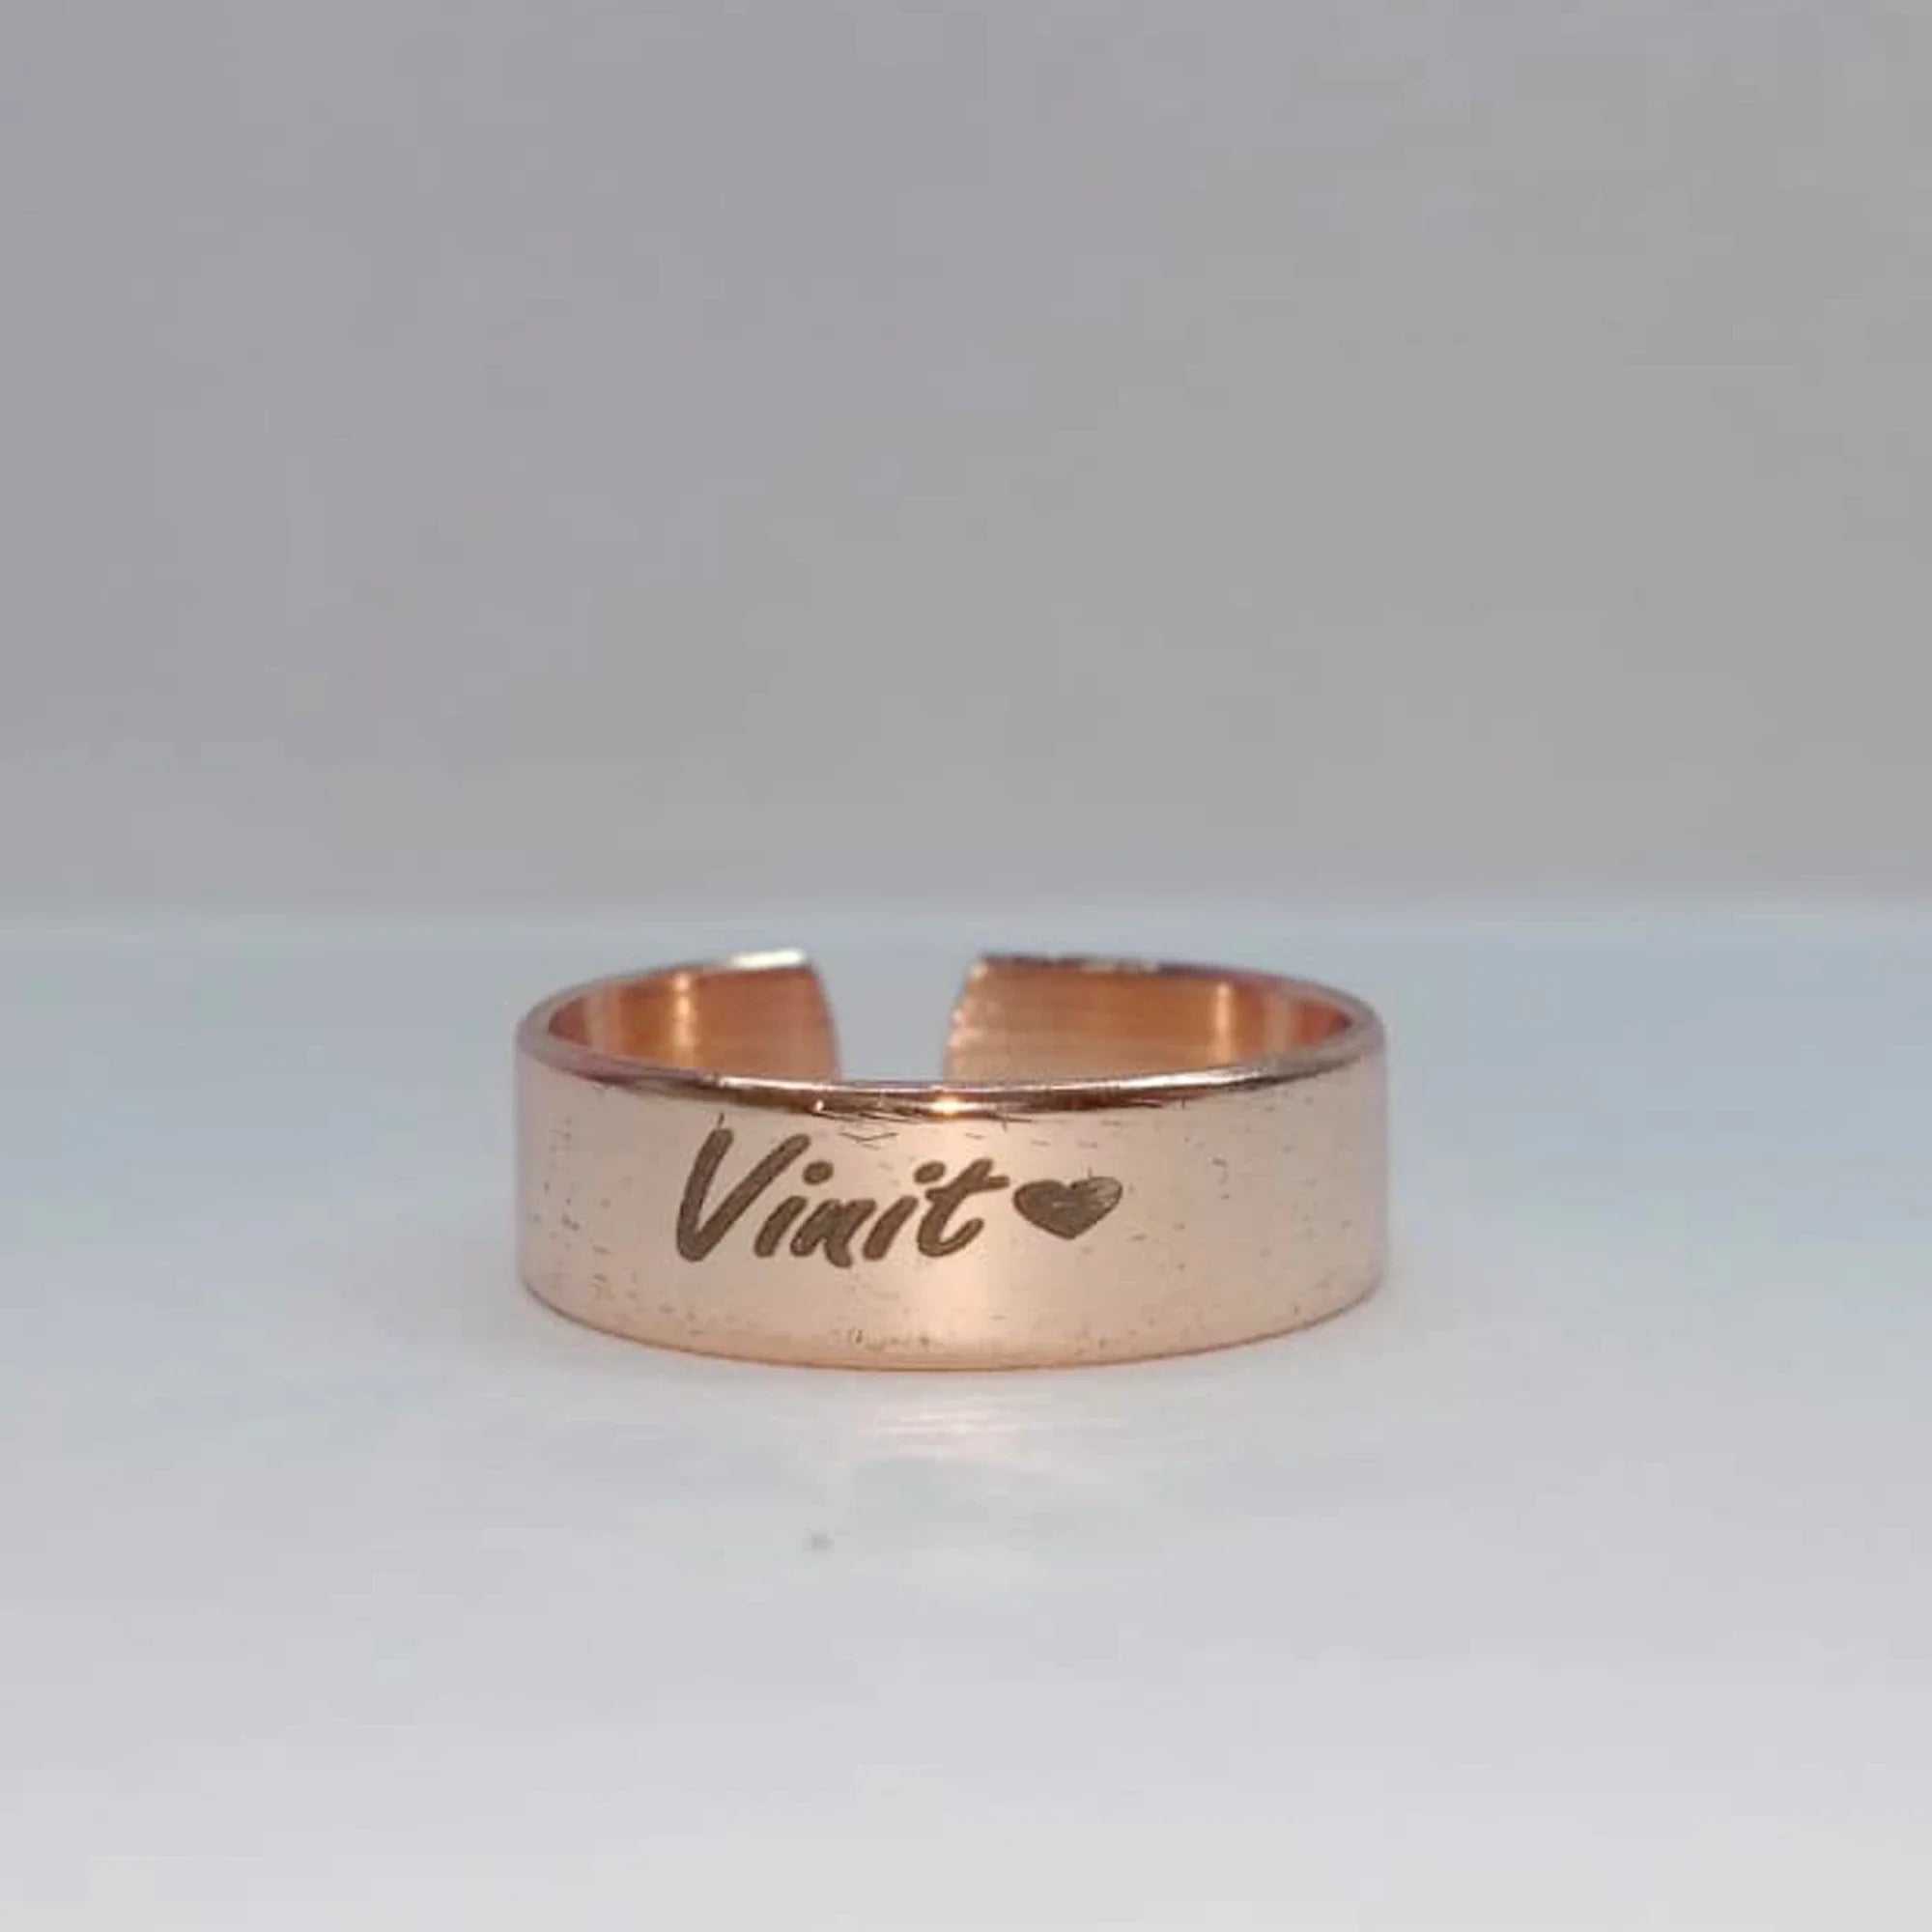 50 Gold Stainless Steel Plain Gold Couple Rings 6mm & 4mm Widths Perfect  For Weddings, Engagements, And Gifts For Lovers, Husbands, Girlfriends,  Boyfriend From Hallo713119, $18.3 | DHgate.Com